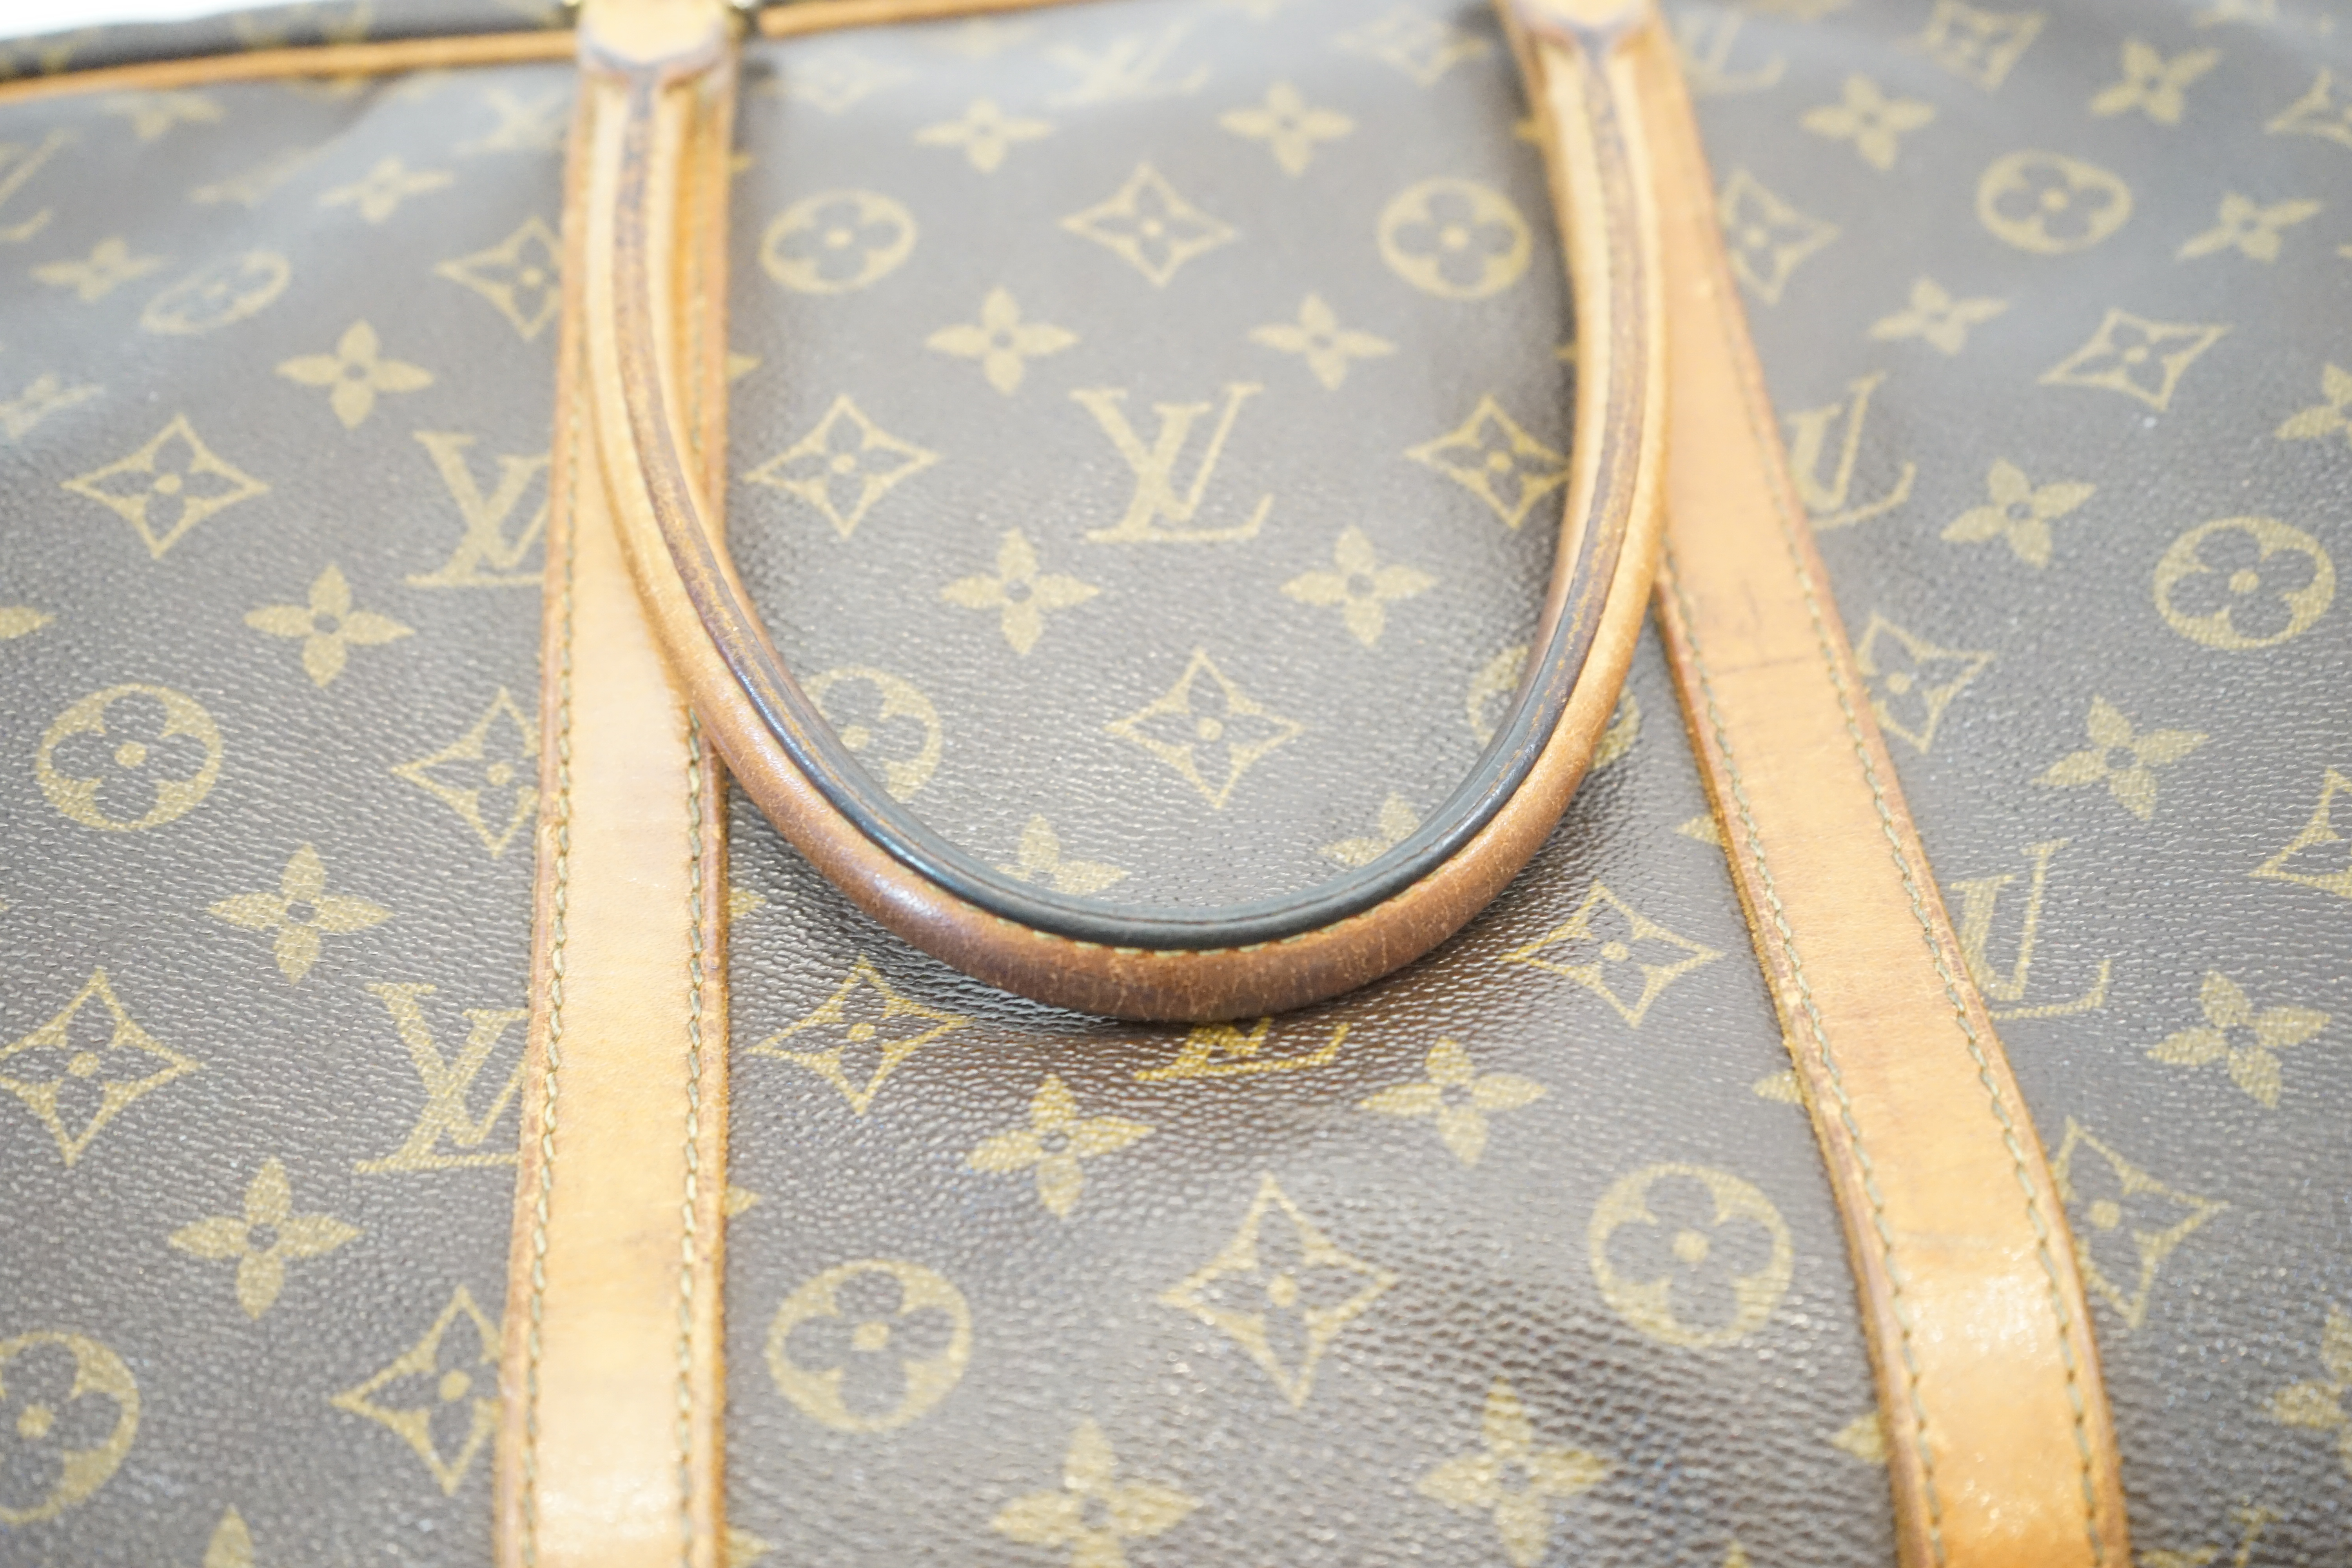 A Louis Vuitton Keepall leather travel bag with luggage tag width 13cm, length 45cm, height 30cm